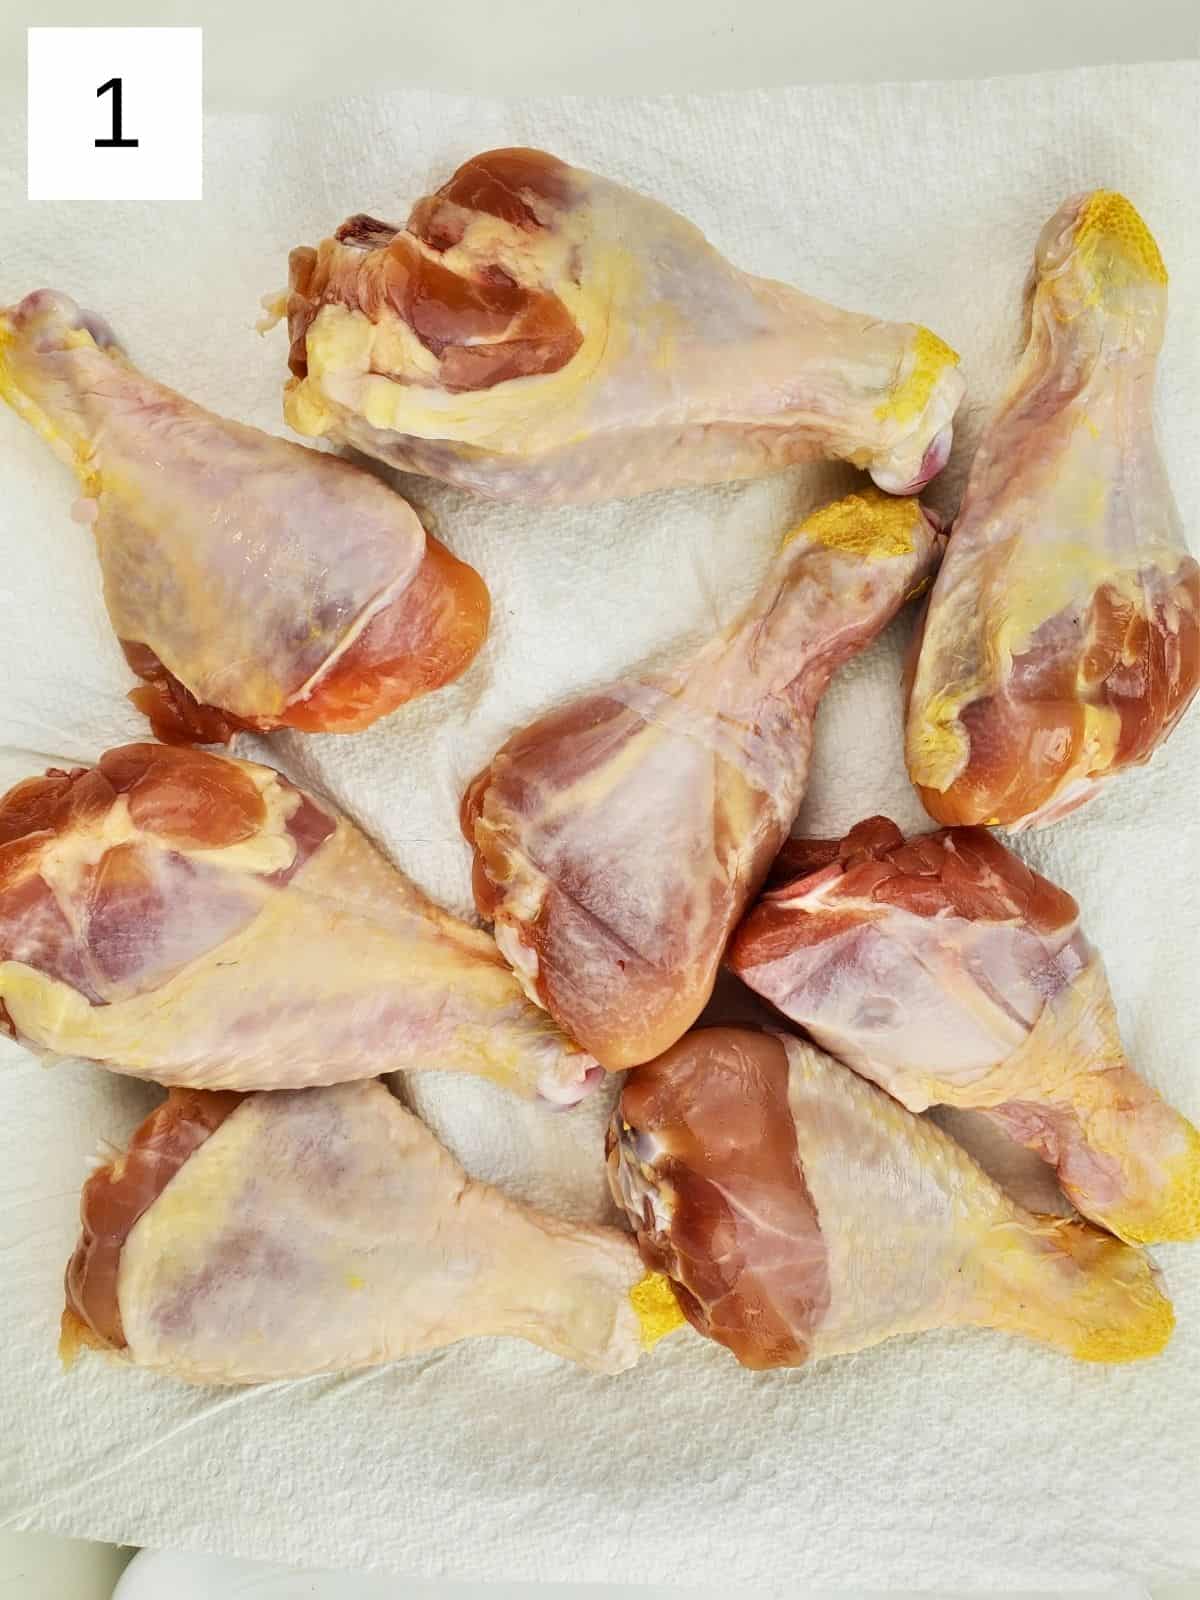 raw eight pieces of chicken legs on a kitchen towel.